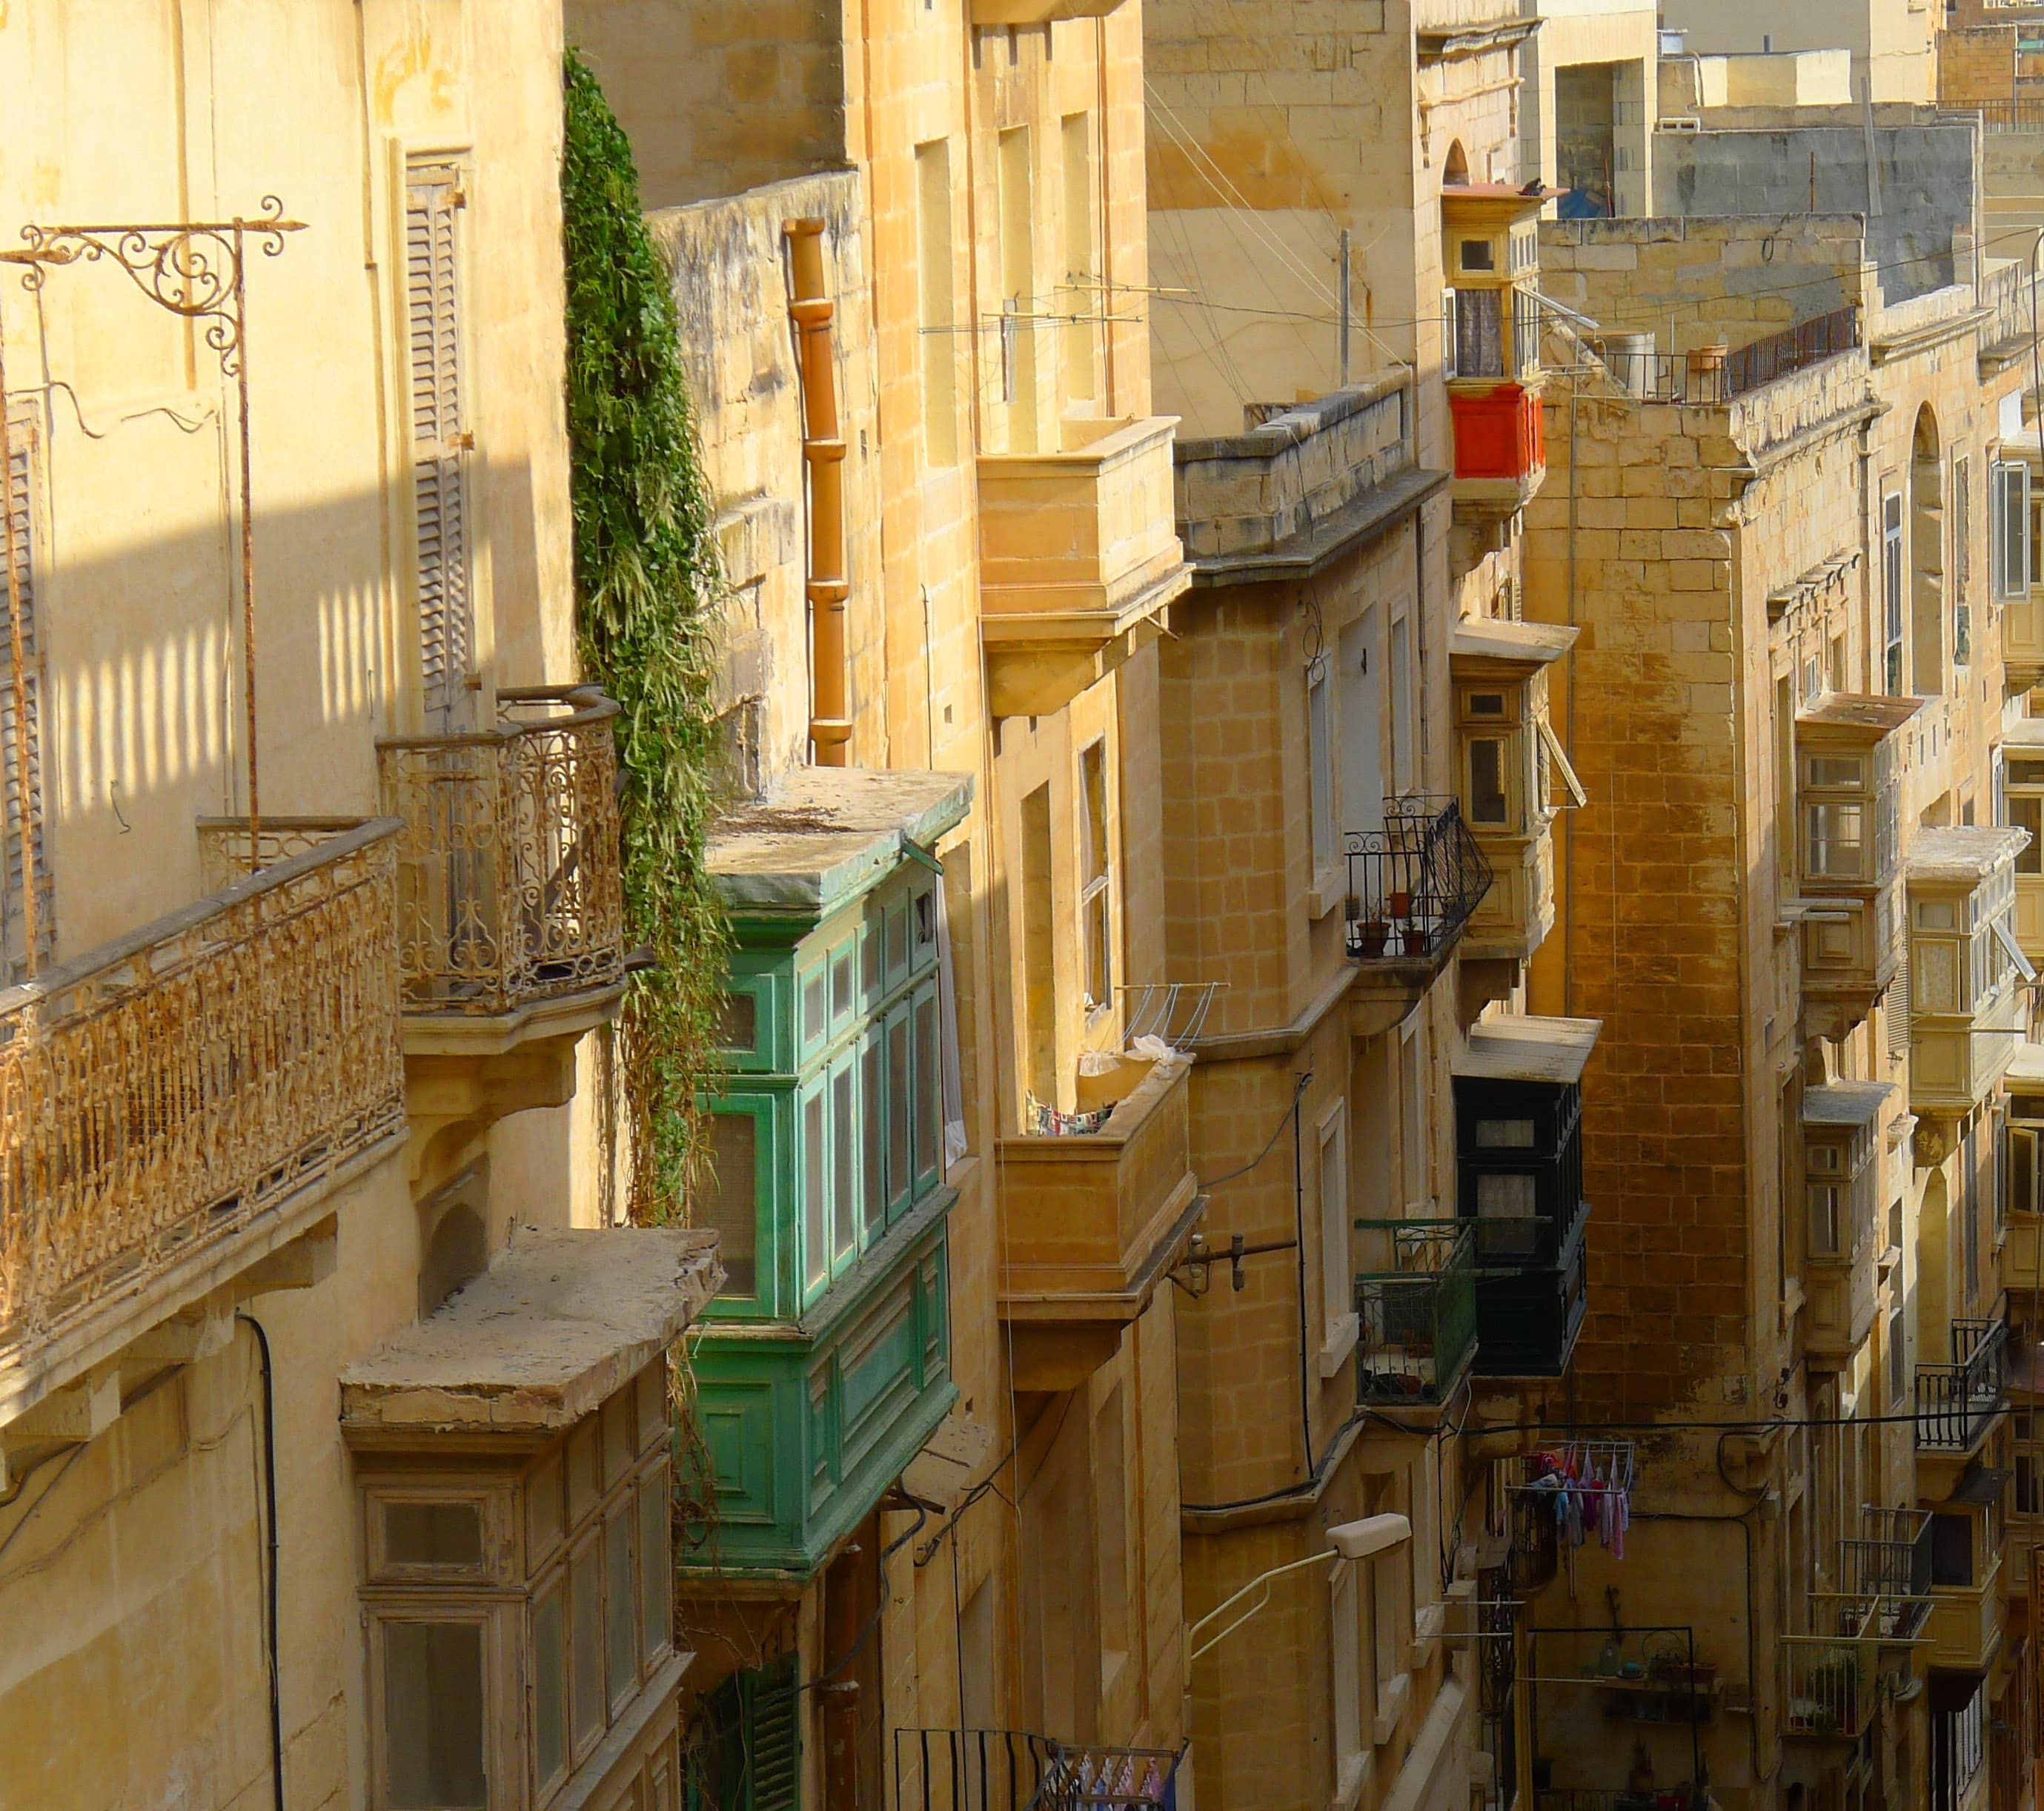 You can enjoy the beautiful buildings in Valletta if you book a holiday villa in Malta